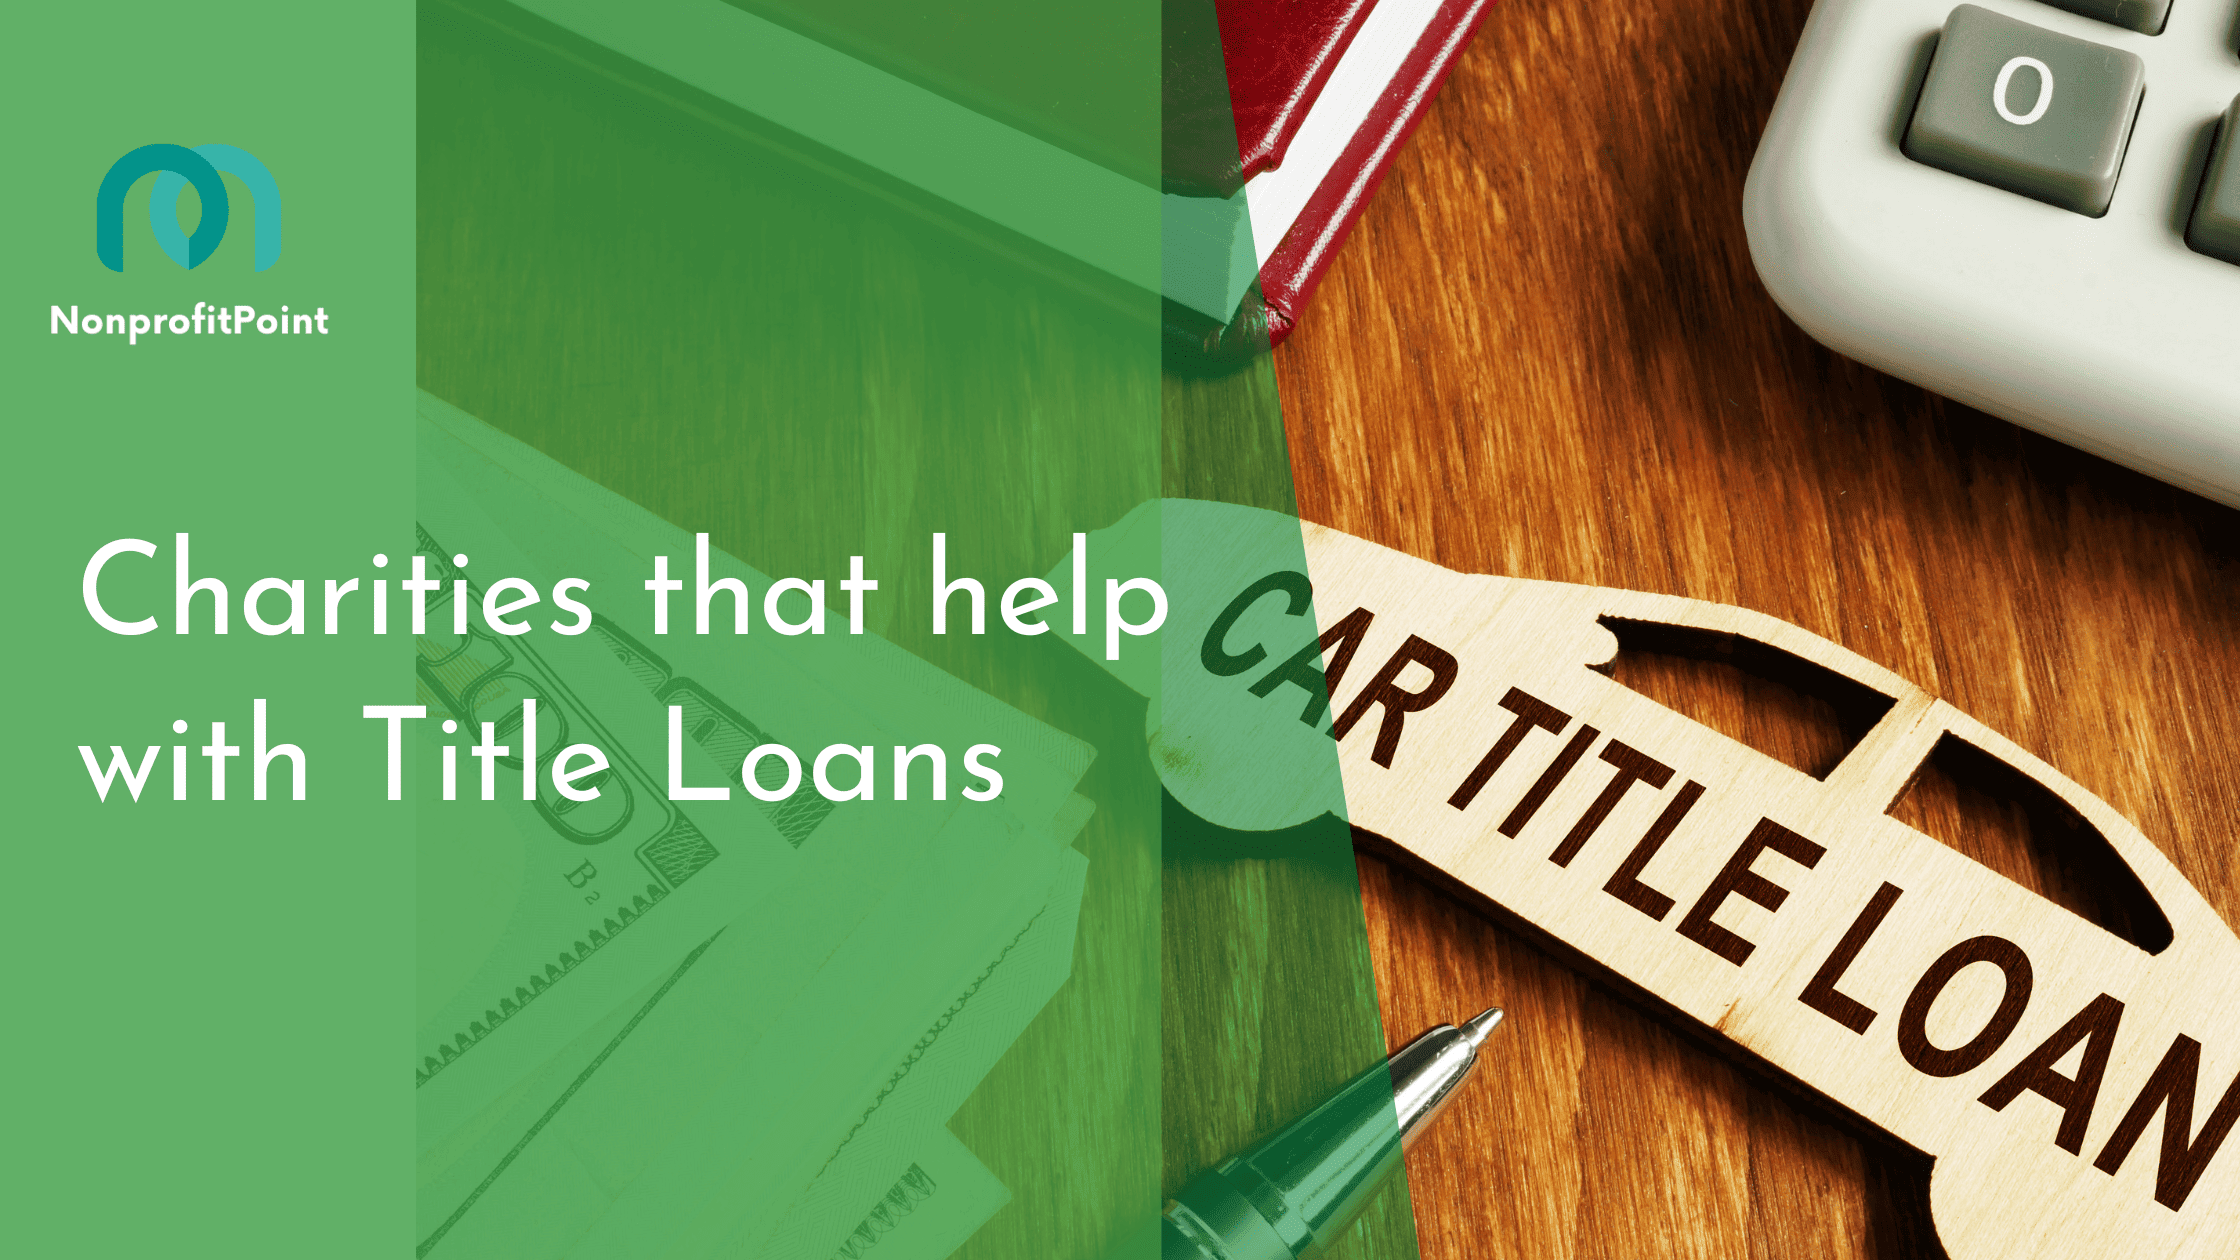 Charities that help with Title Loans